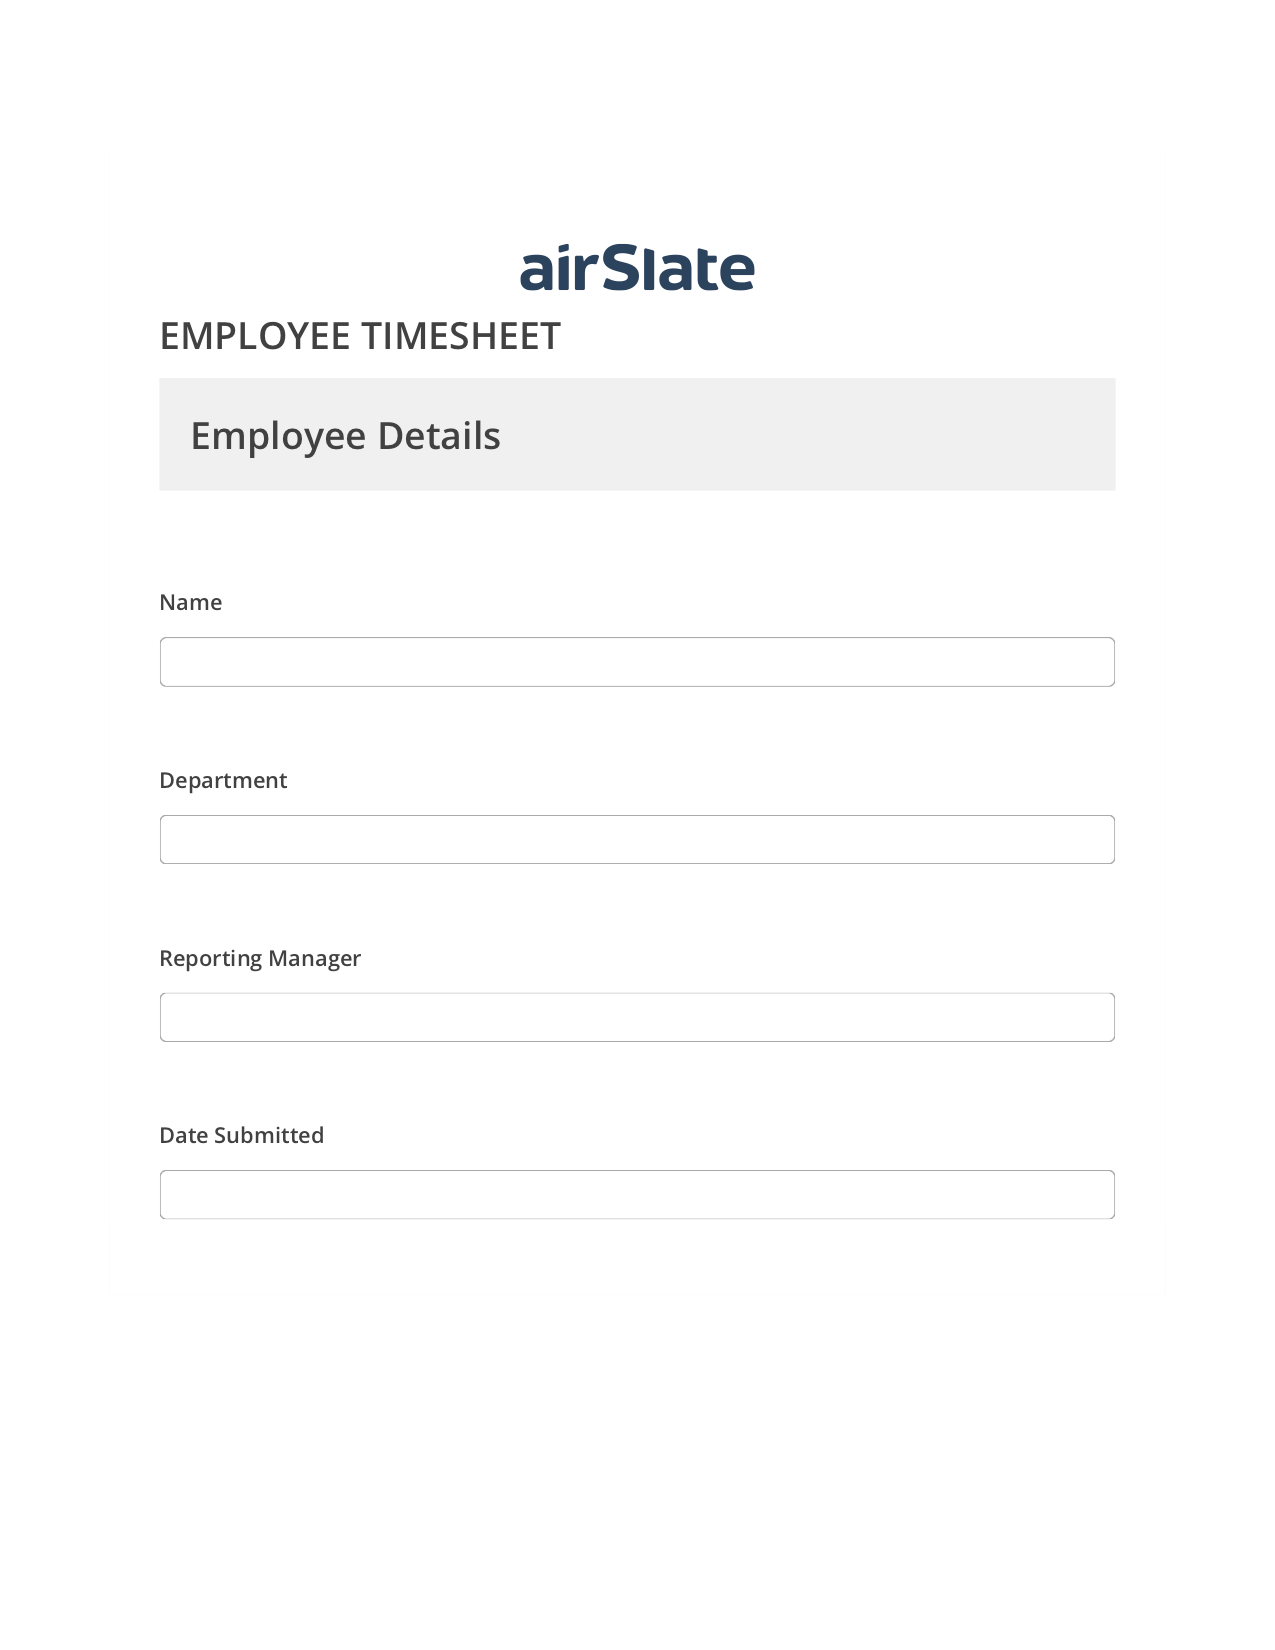 Employee Timesheet Flow Pre-fill from Salesforce Records with SOQL Bot